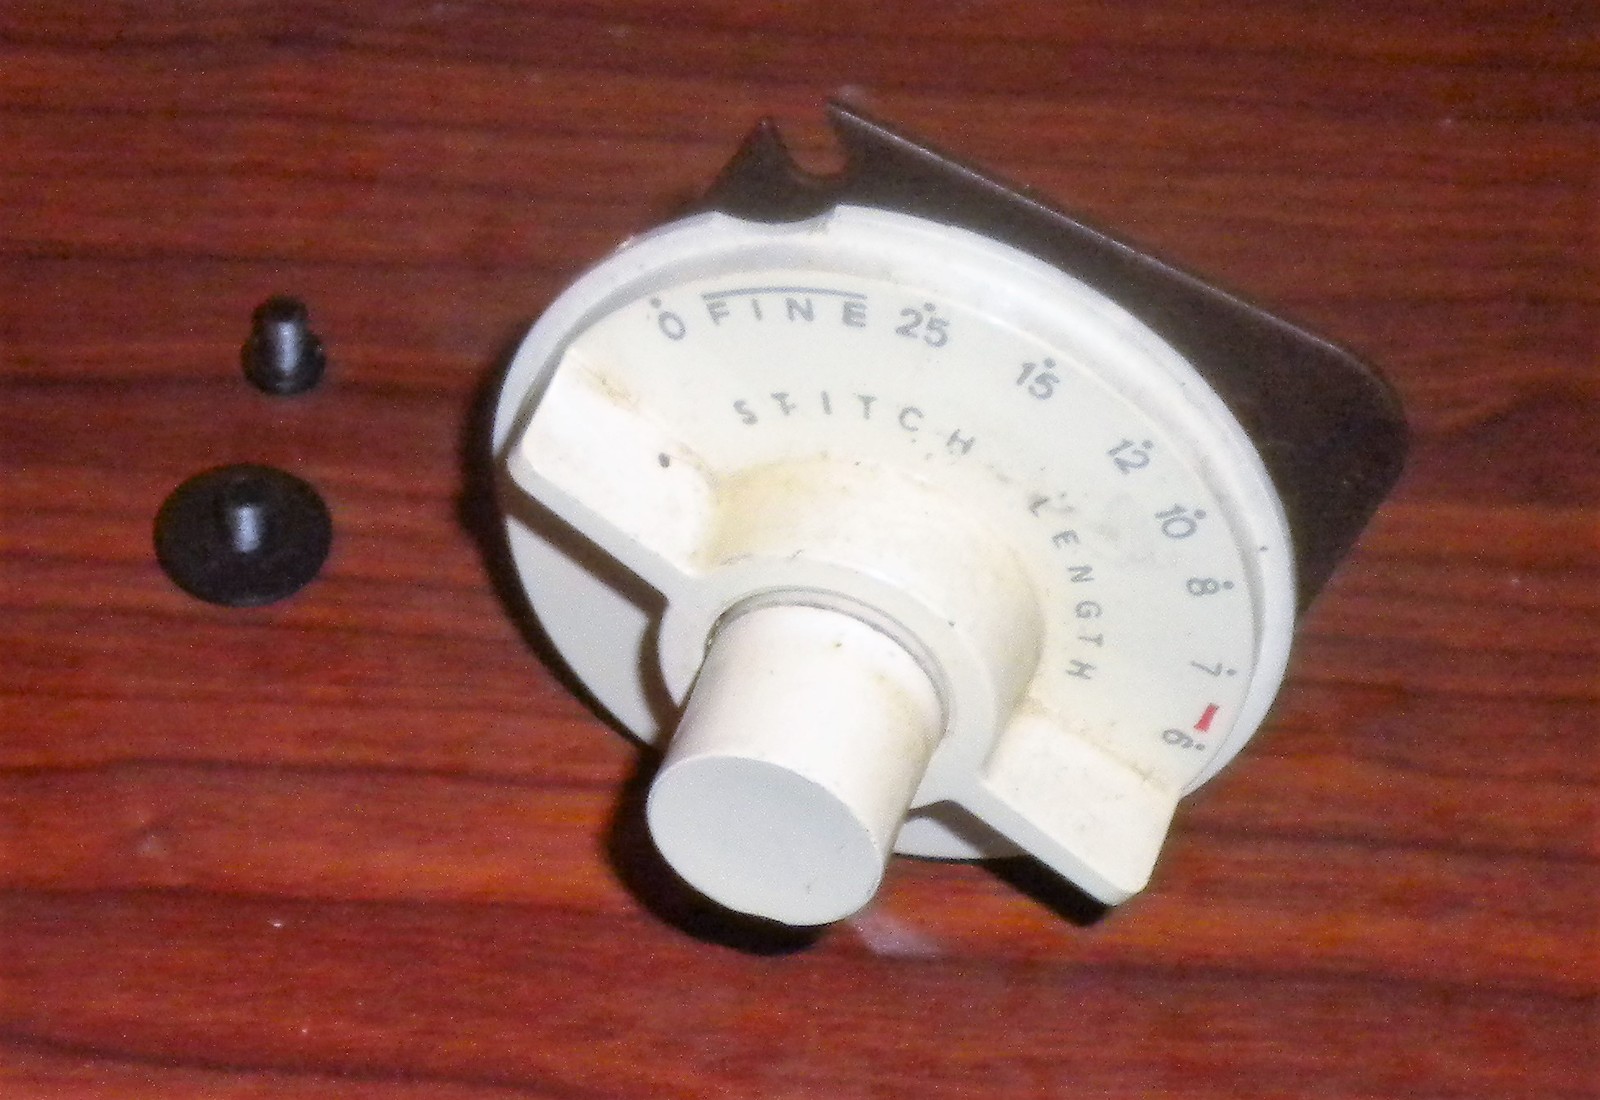 Singer 533 Stylist Apollo Button Hole & Feed Regulator Assembly - $15.00